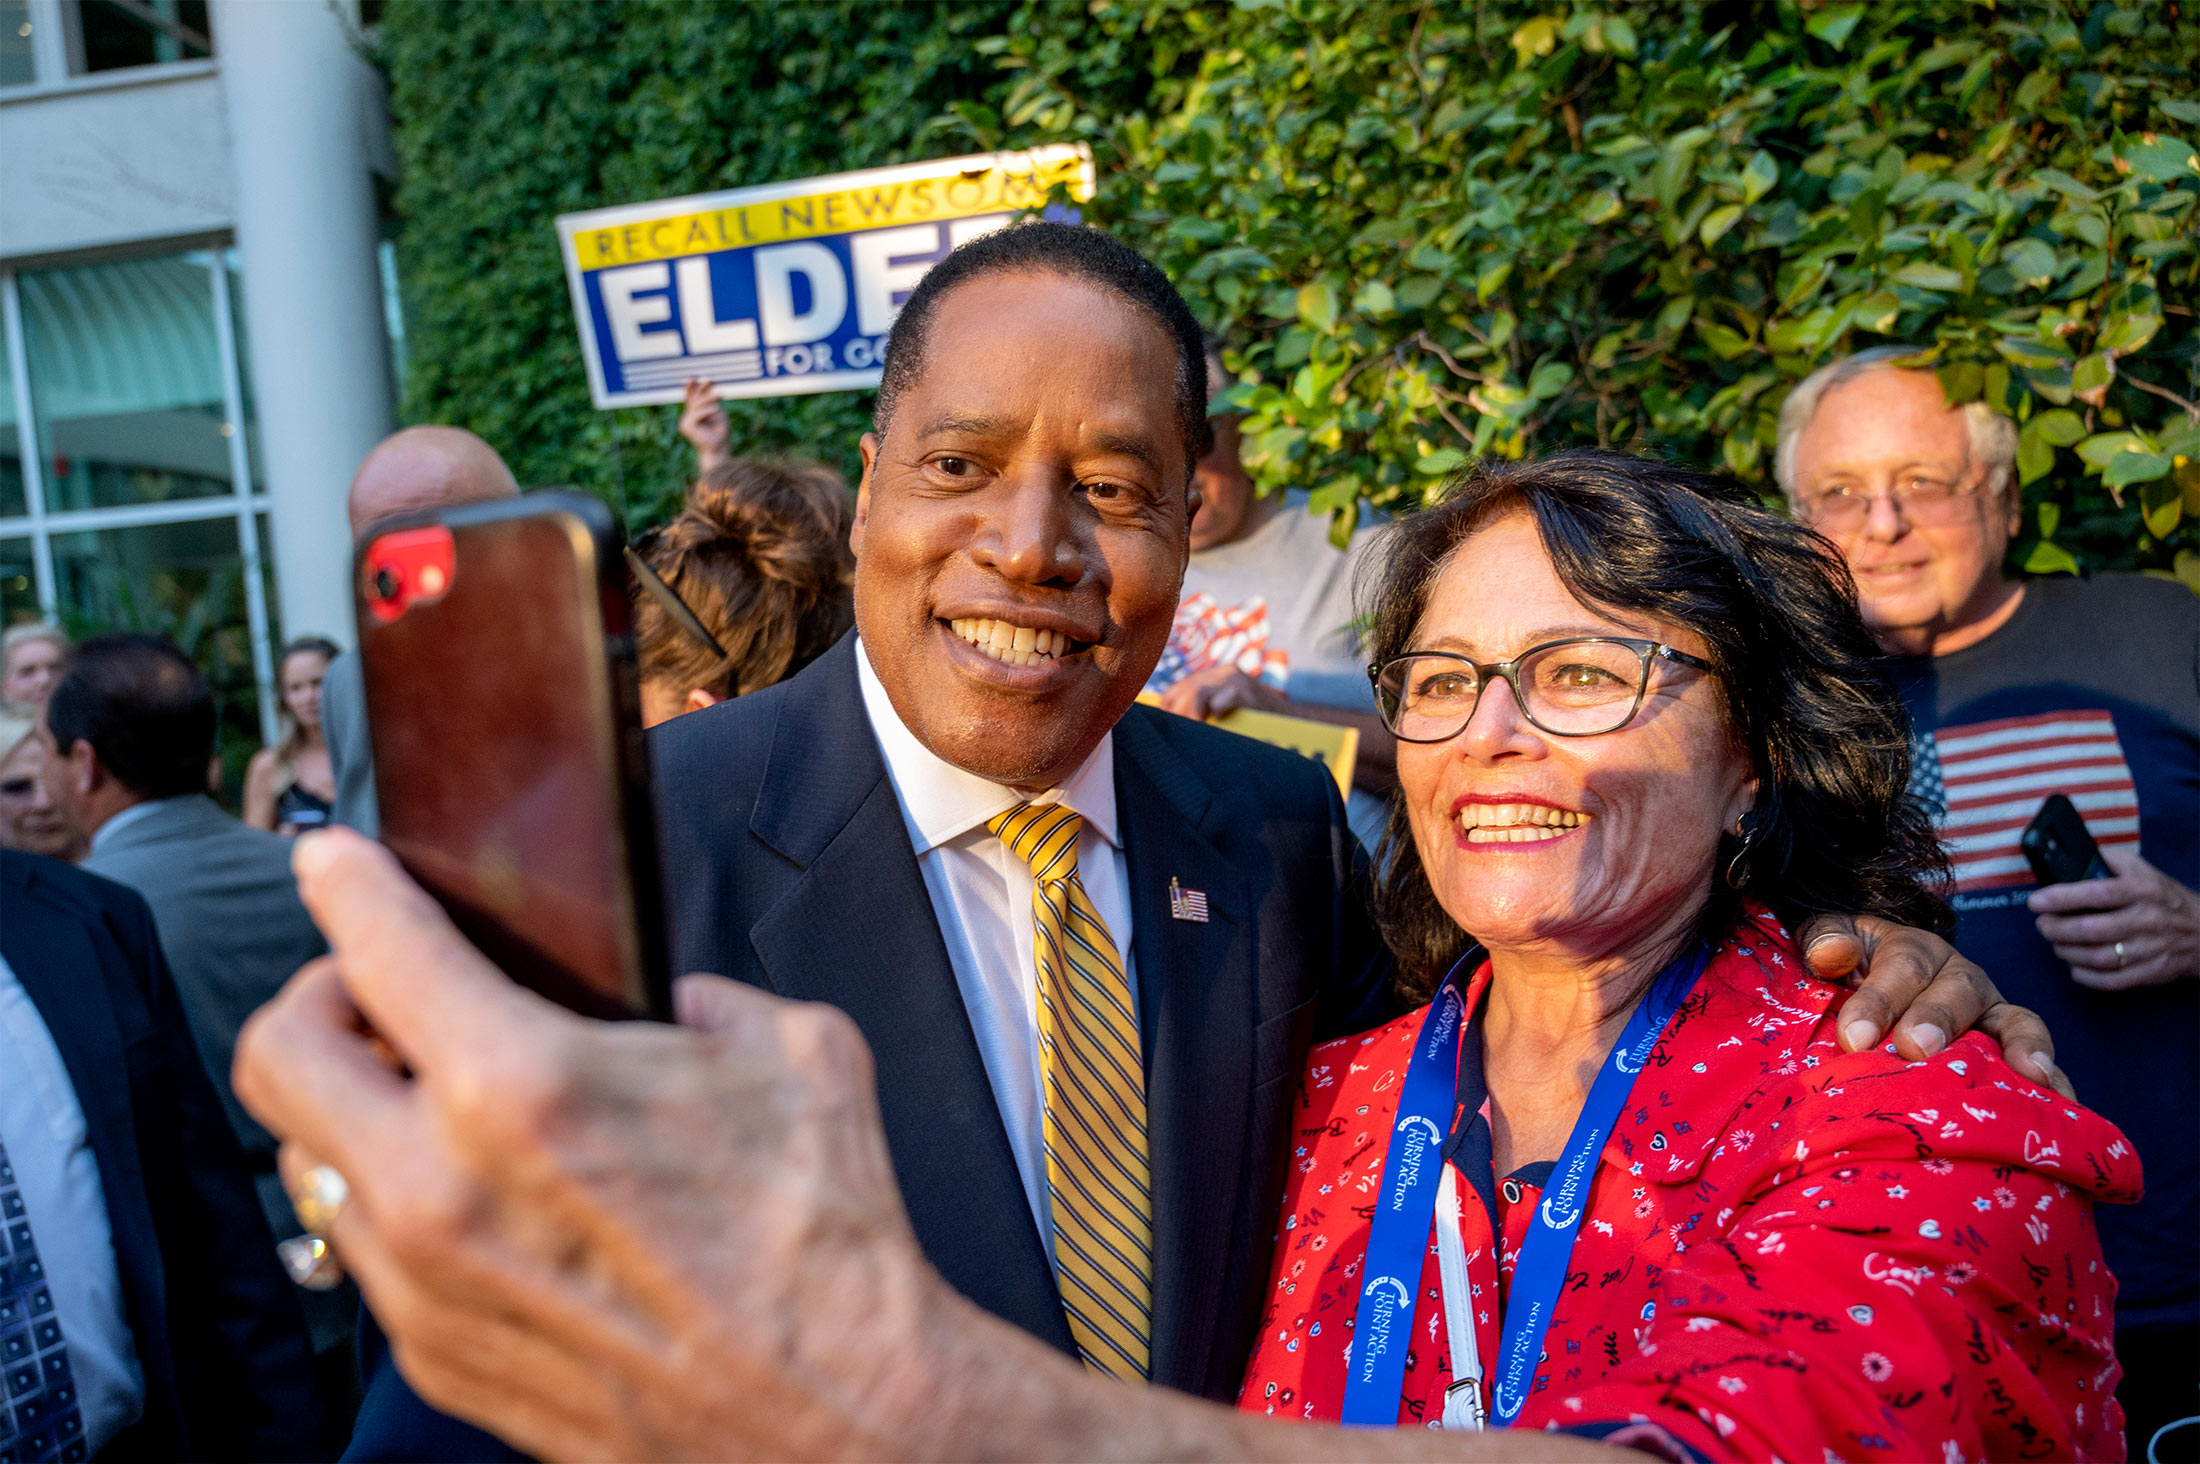  Larry Elder takes a selfie with a supporter in Woodland Hills, California, on Aug. 24.